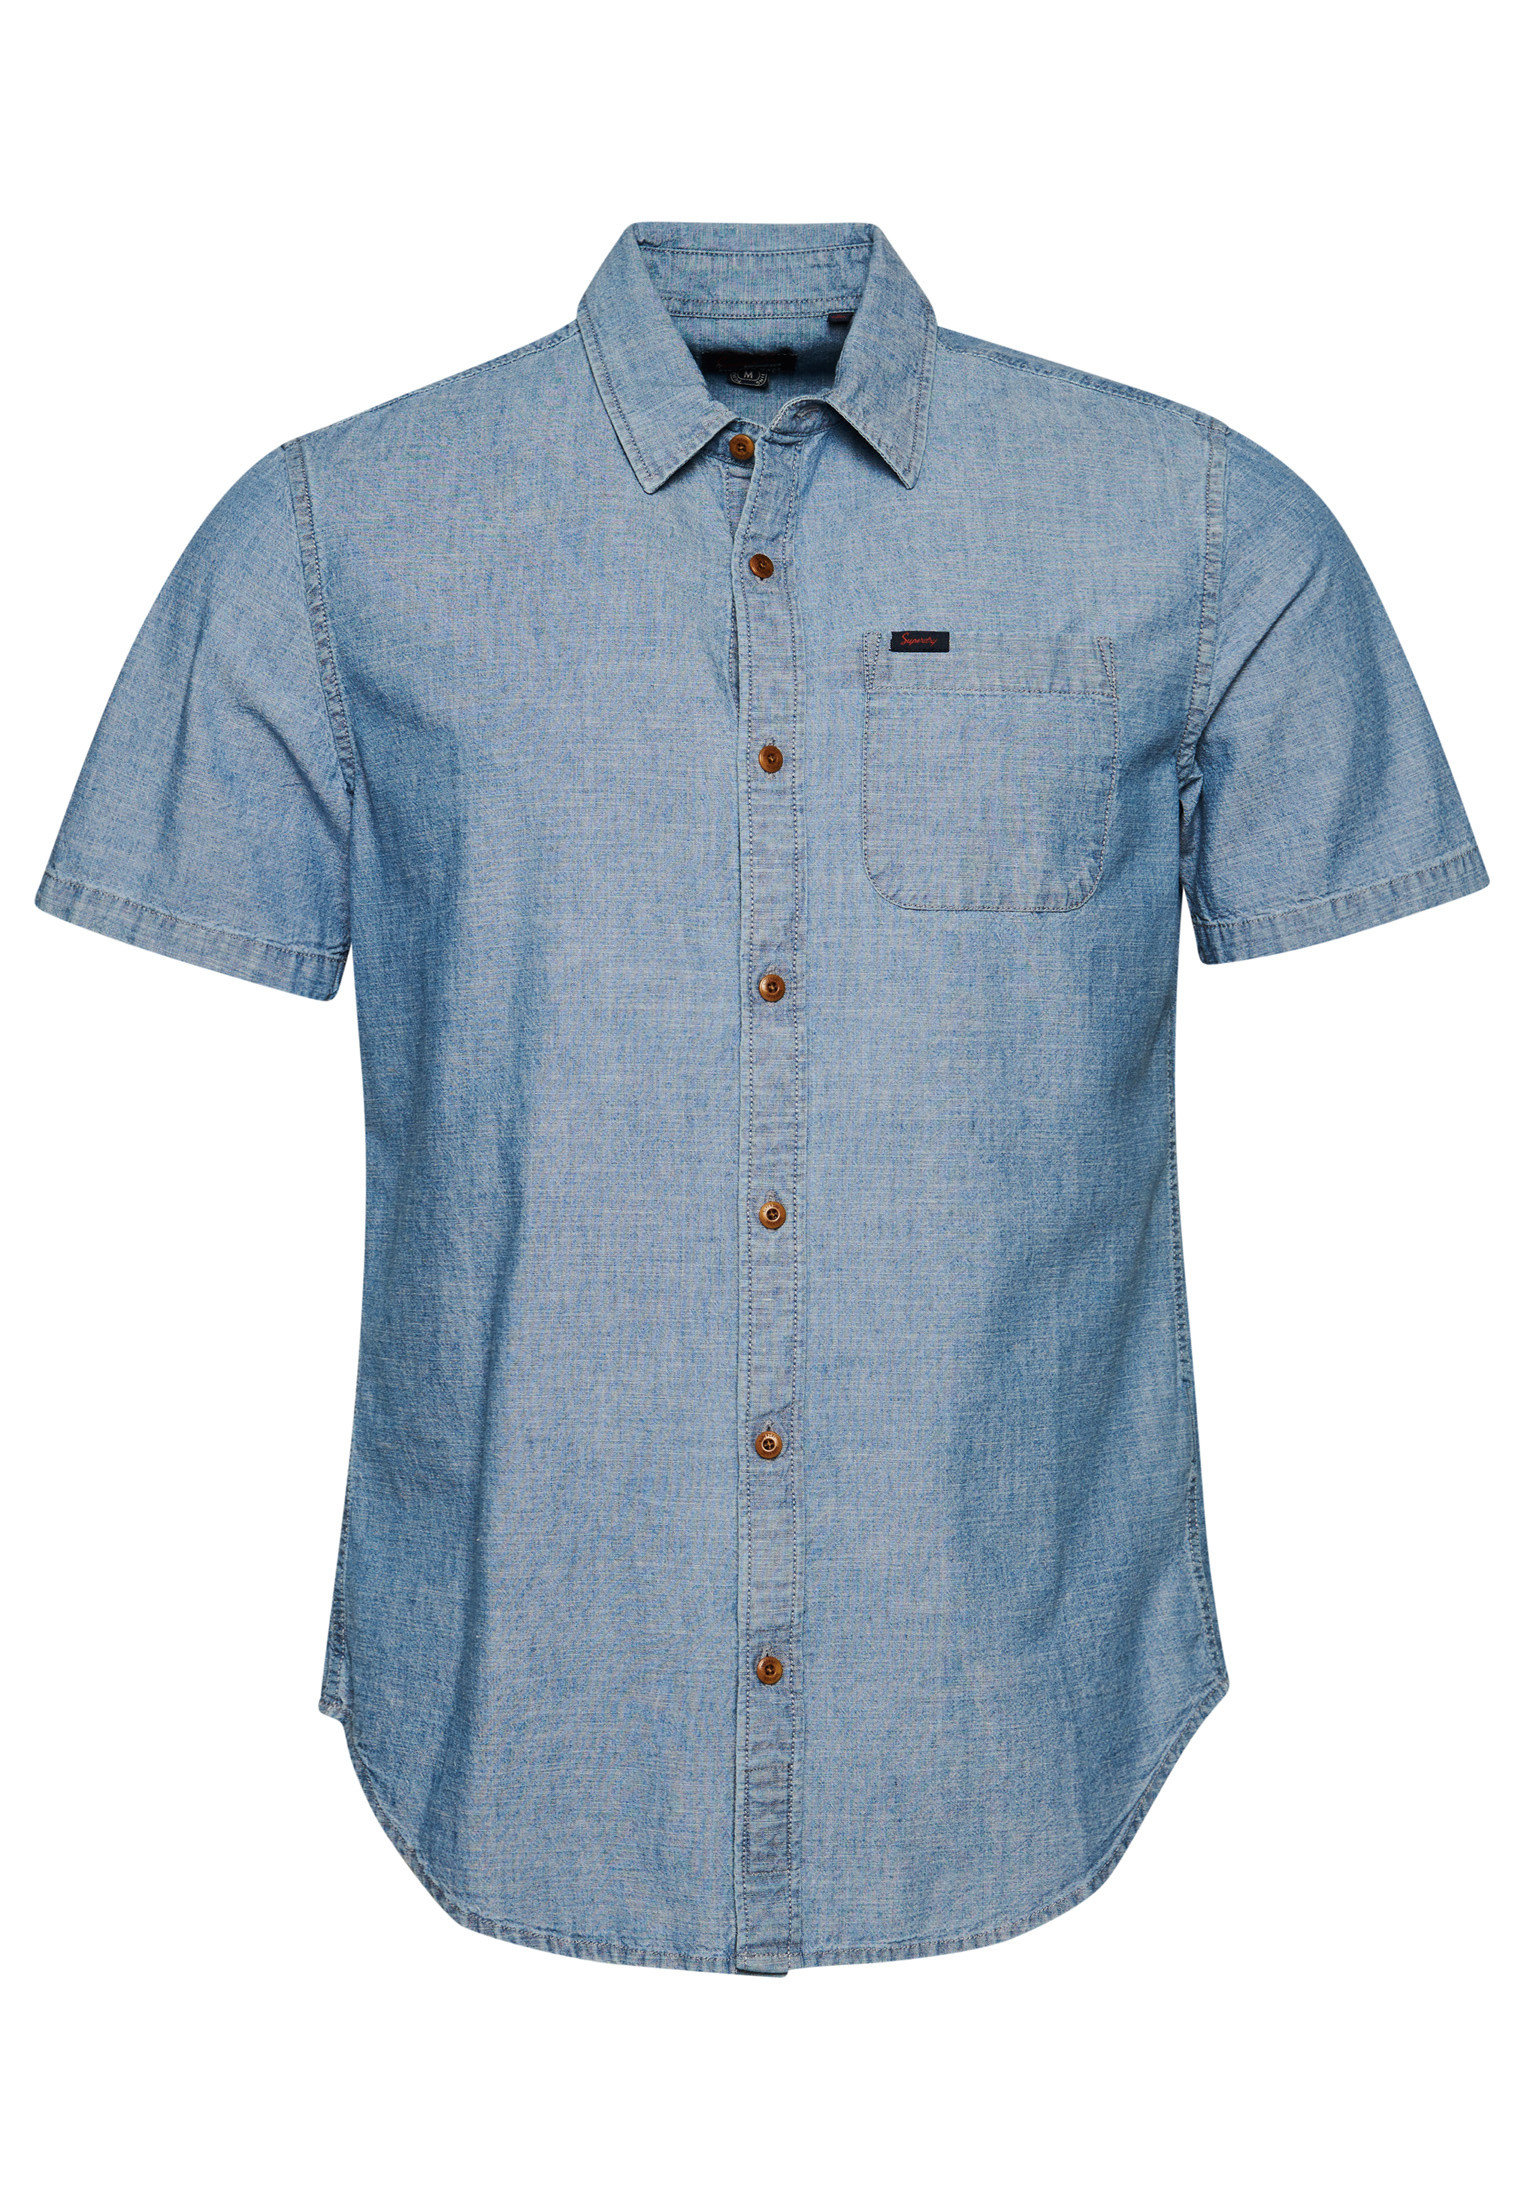 Superdry - Camicia a manica corta effetto chambray, Azzurro, large image number 0